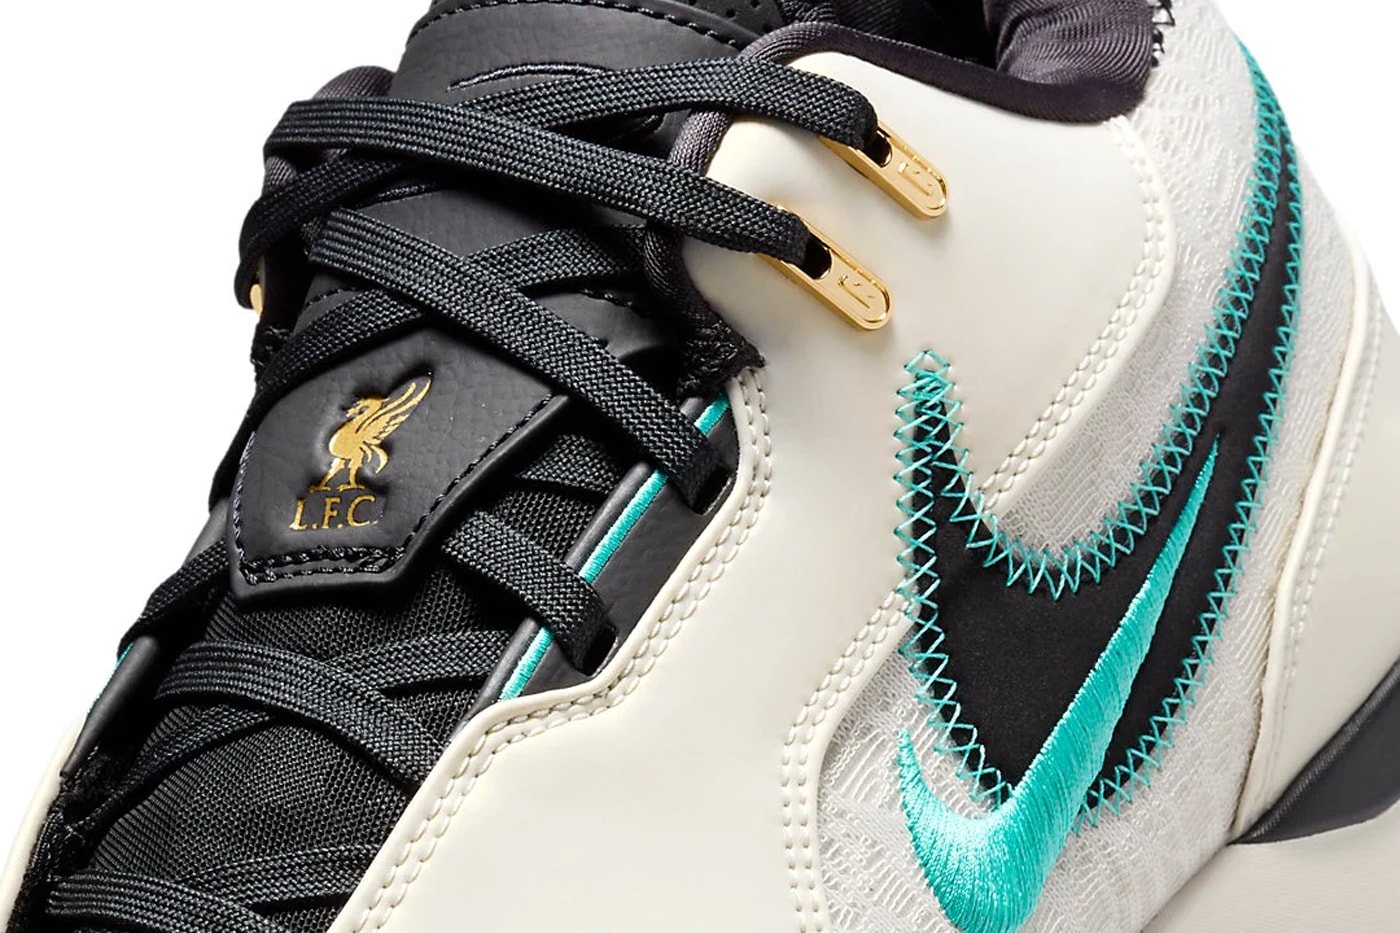 Official Look at the Liverpool FC x Nike LeBron NXXT Gen AMPD Release FJ1566-101 lebron james king james basketball shoes swoosh Light Orewood Brown/Washed Teal-Metallic Gold-Black info